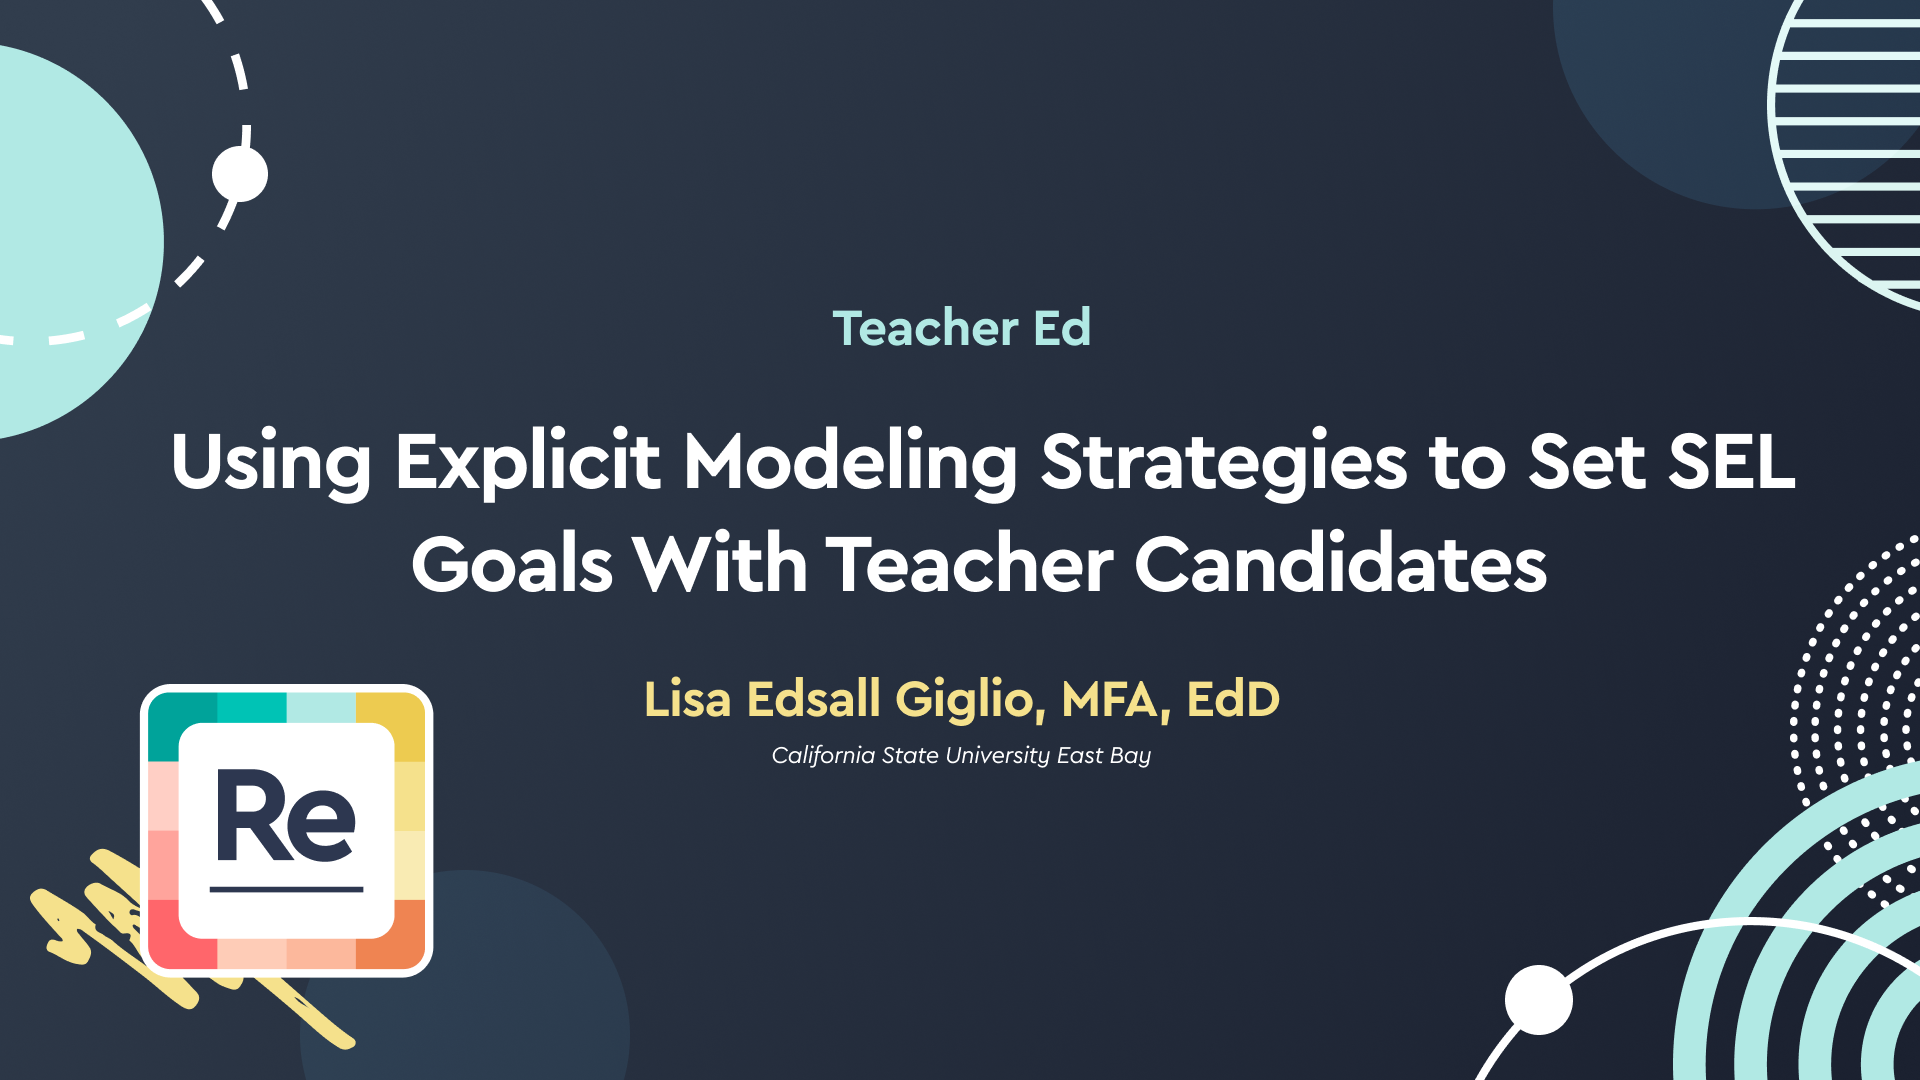 Using Explicit Modeling Strategies to Set SEL Goals With Teacher Candidates